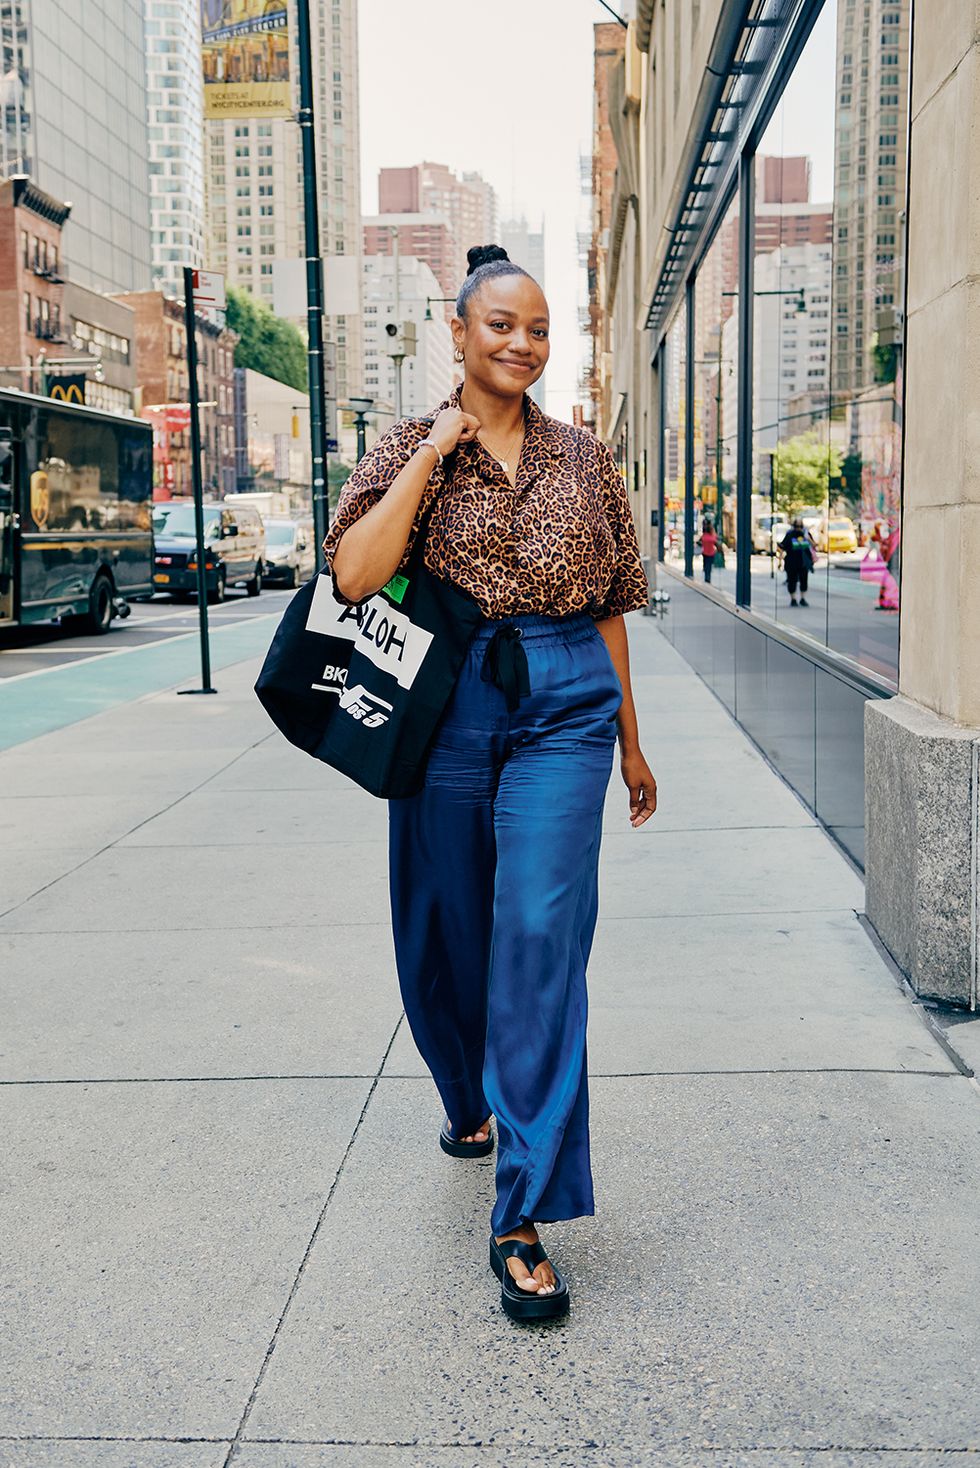 a bazaar editor wears a leopard print blouse and jeans to illustrate a guide to the best work outfit ideas 2022